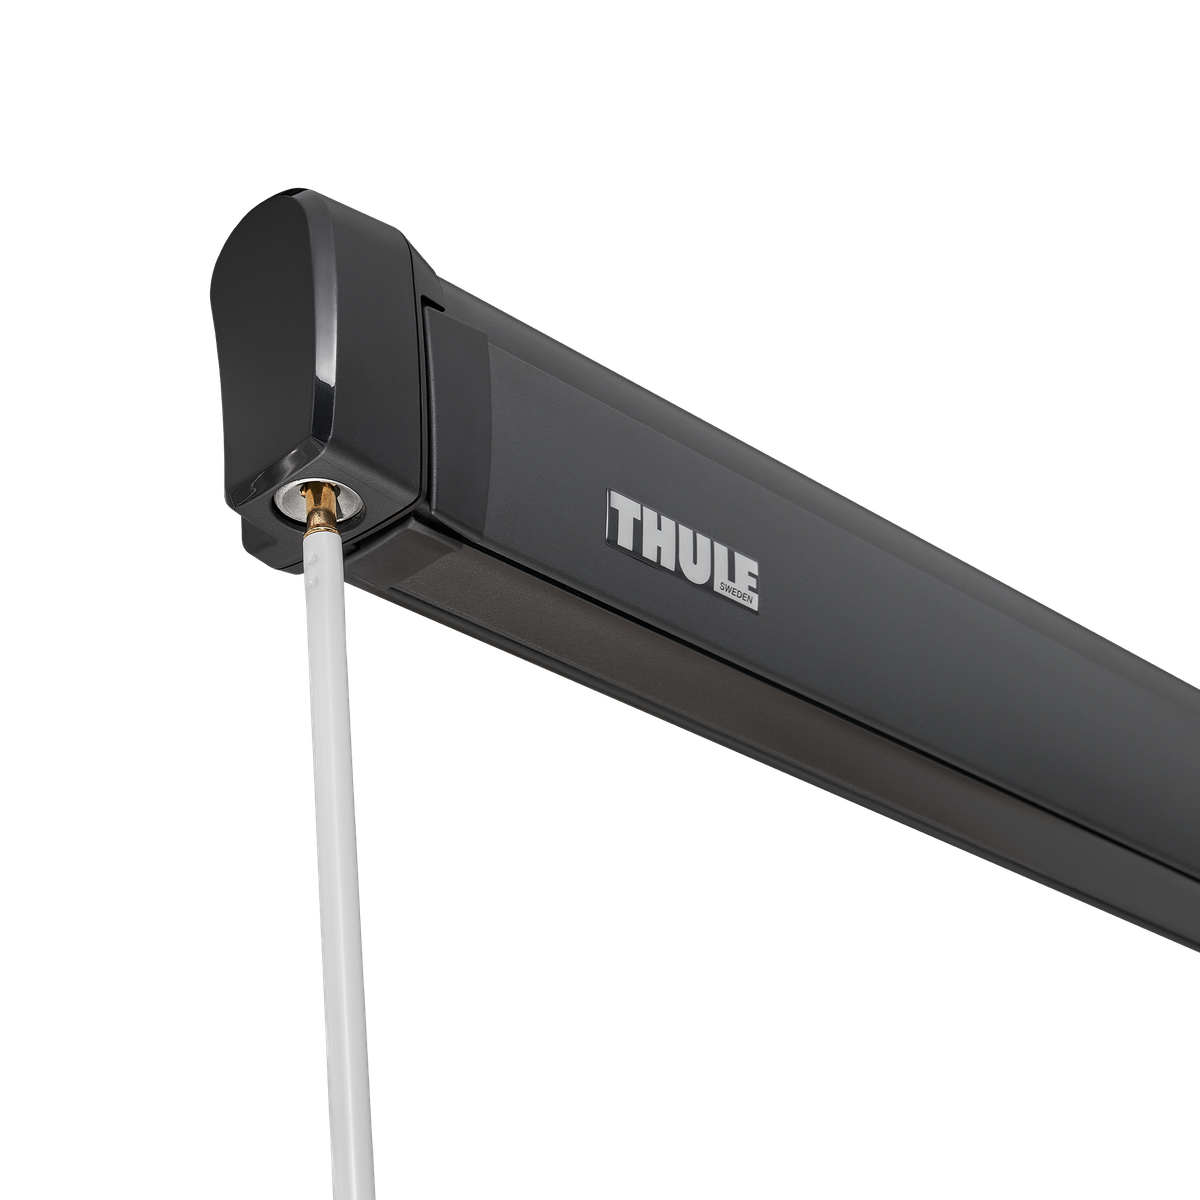 Thule HideAway wall mounted awning